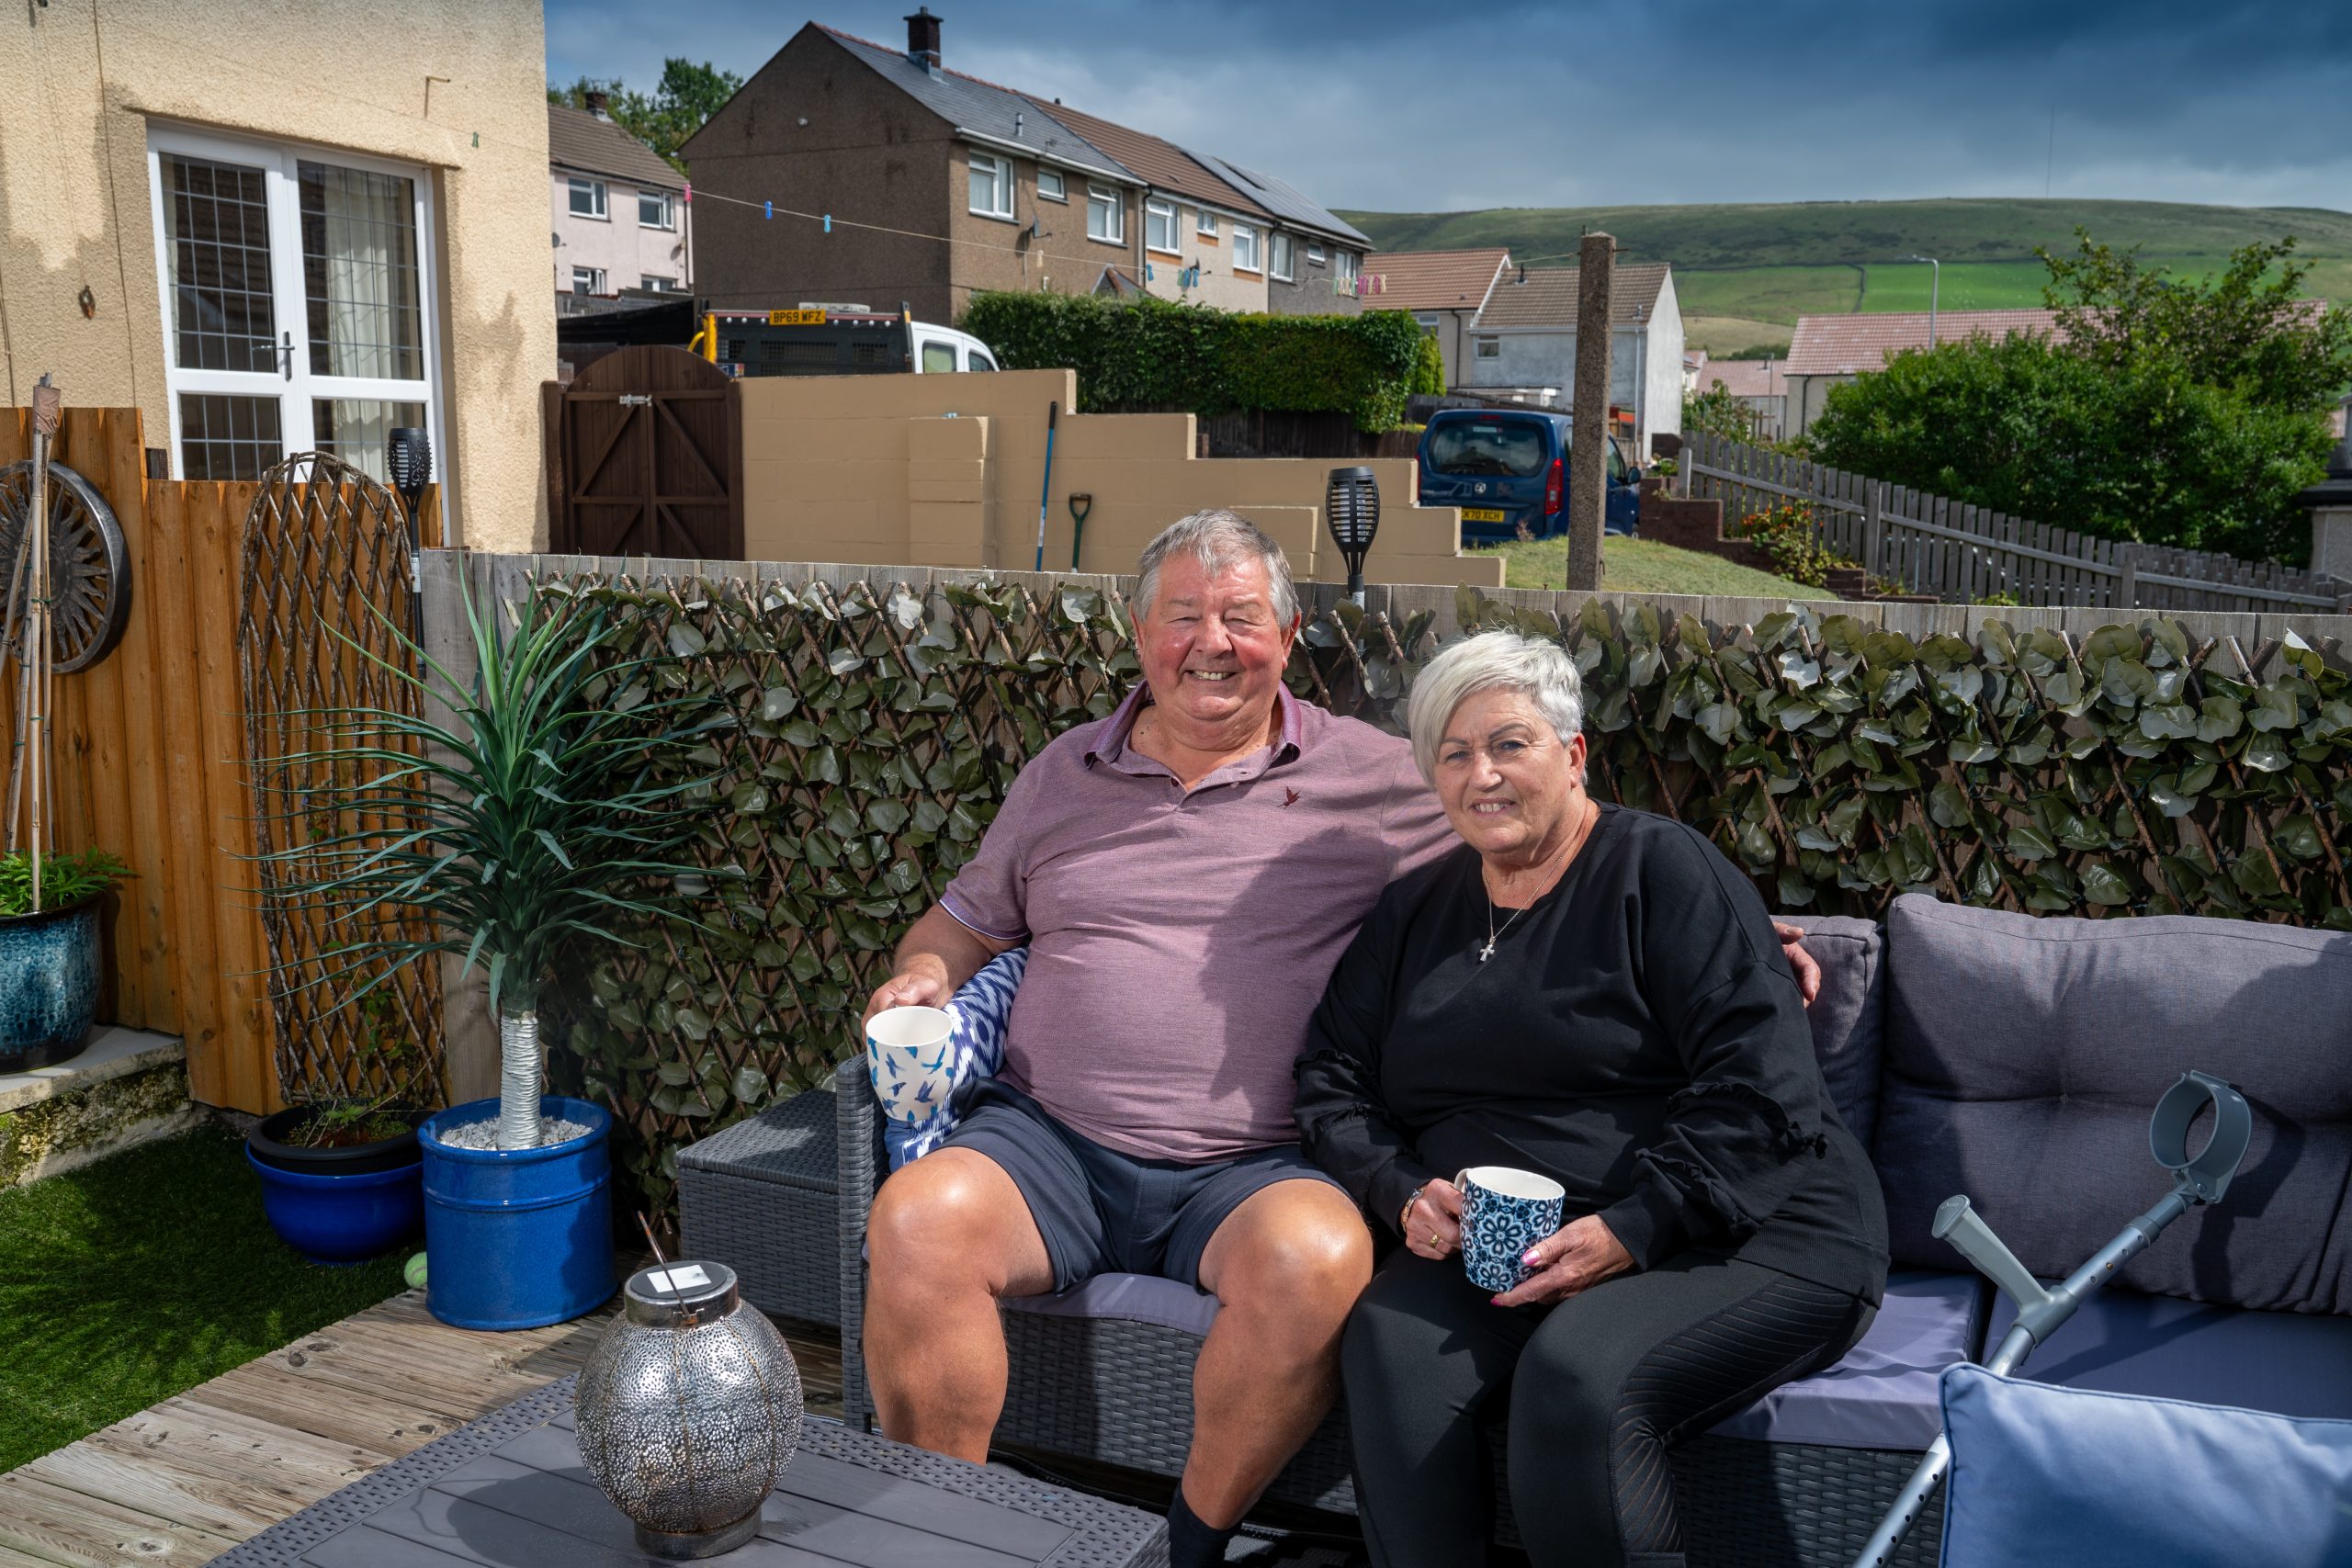 A smiling older couple sitting together on outdoor furniture in a backyard with houses and hills in the background.